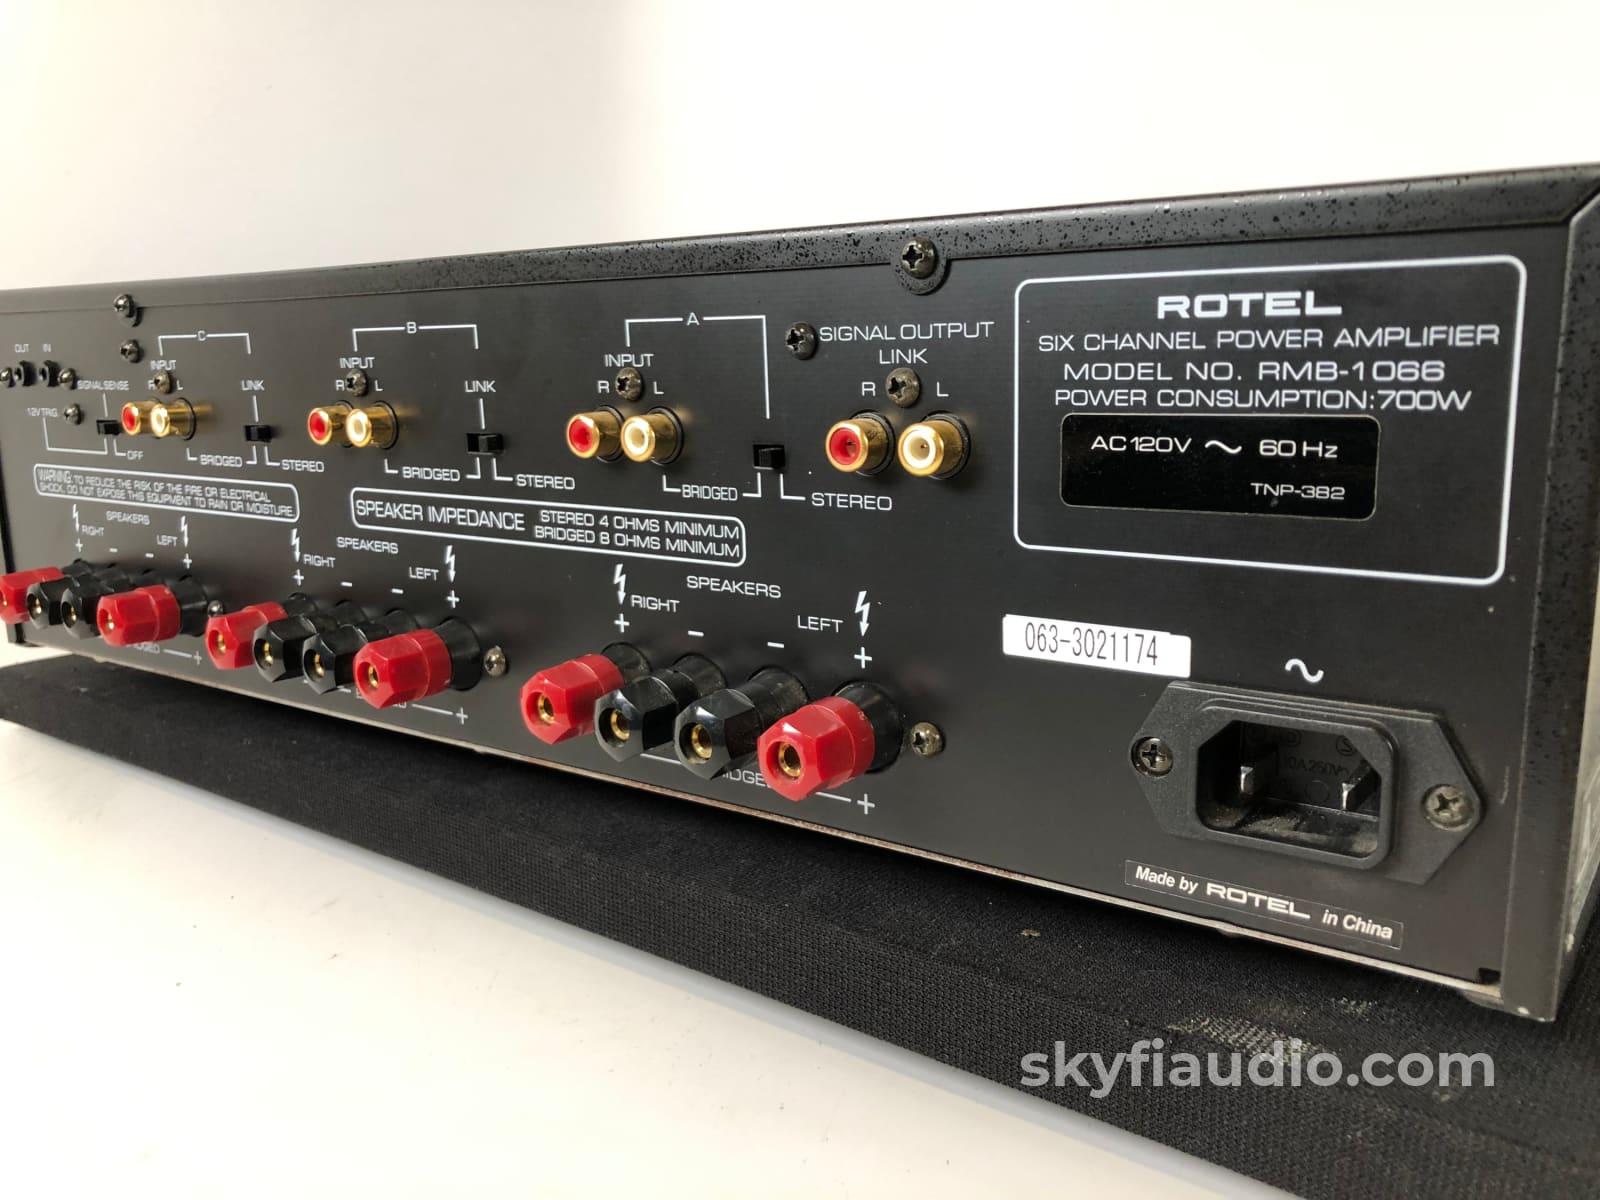 Rotel Rmb-1066 Six Channel Solid State Amplifier